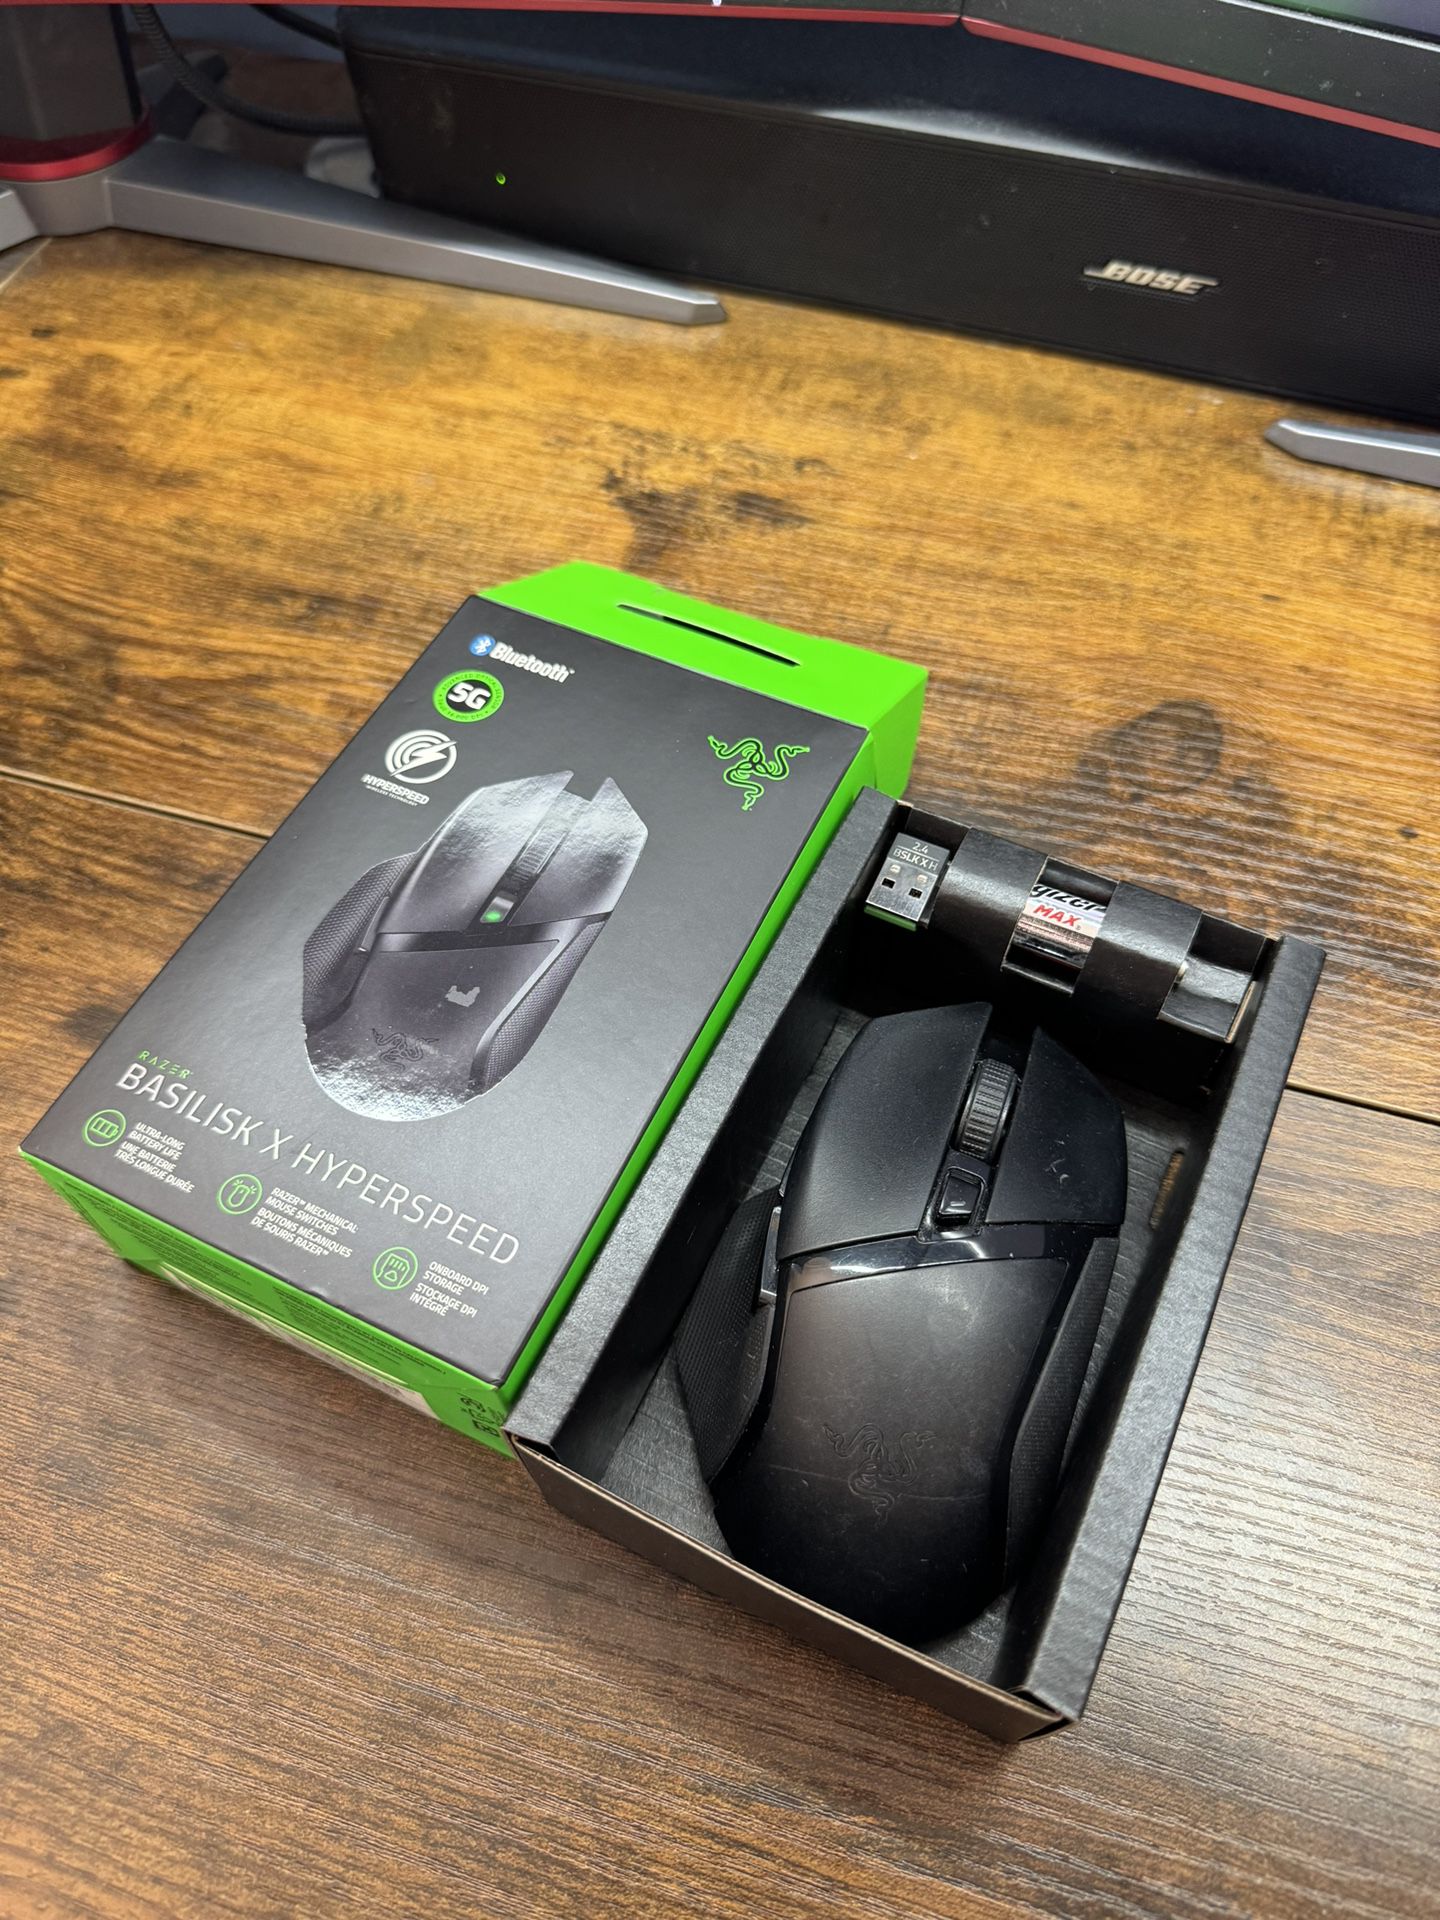 【Works Great】Razer Basilisk X Hyperspeed - Wireless Gaming Mouse - Bluetooth/ 2.4 USB Dongle With Battery 